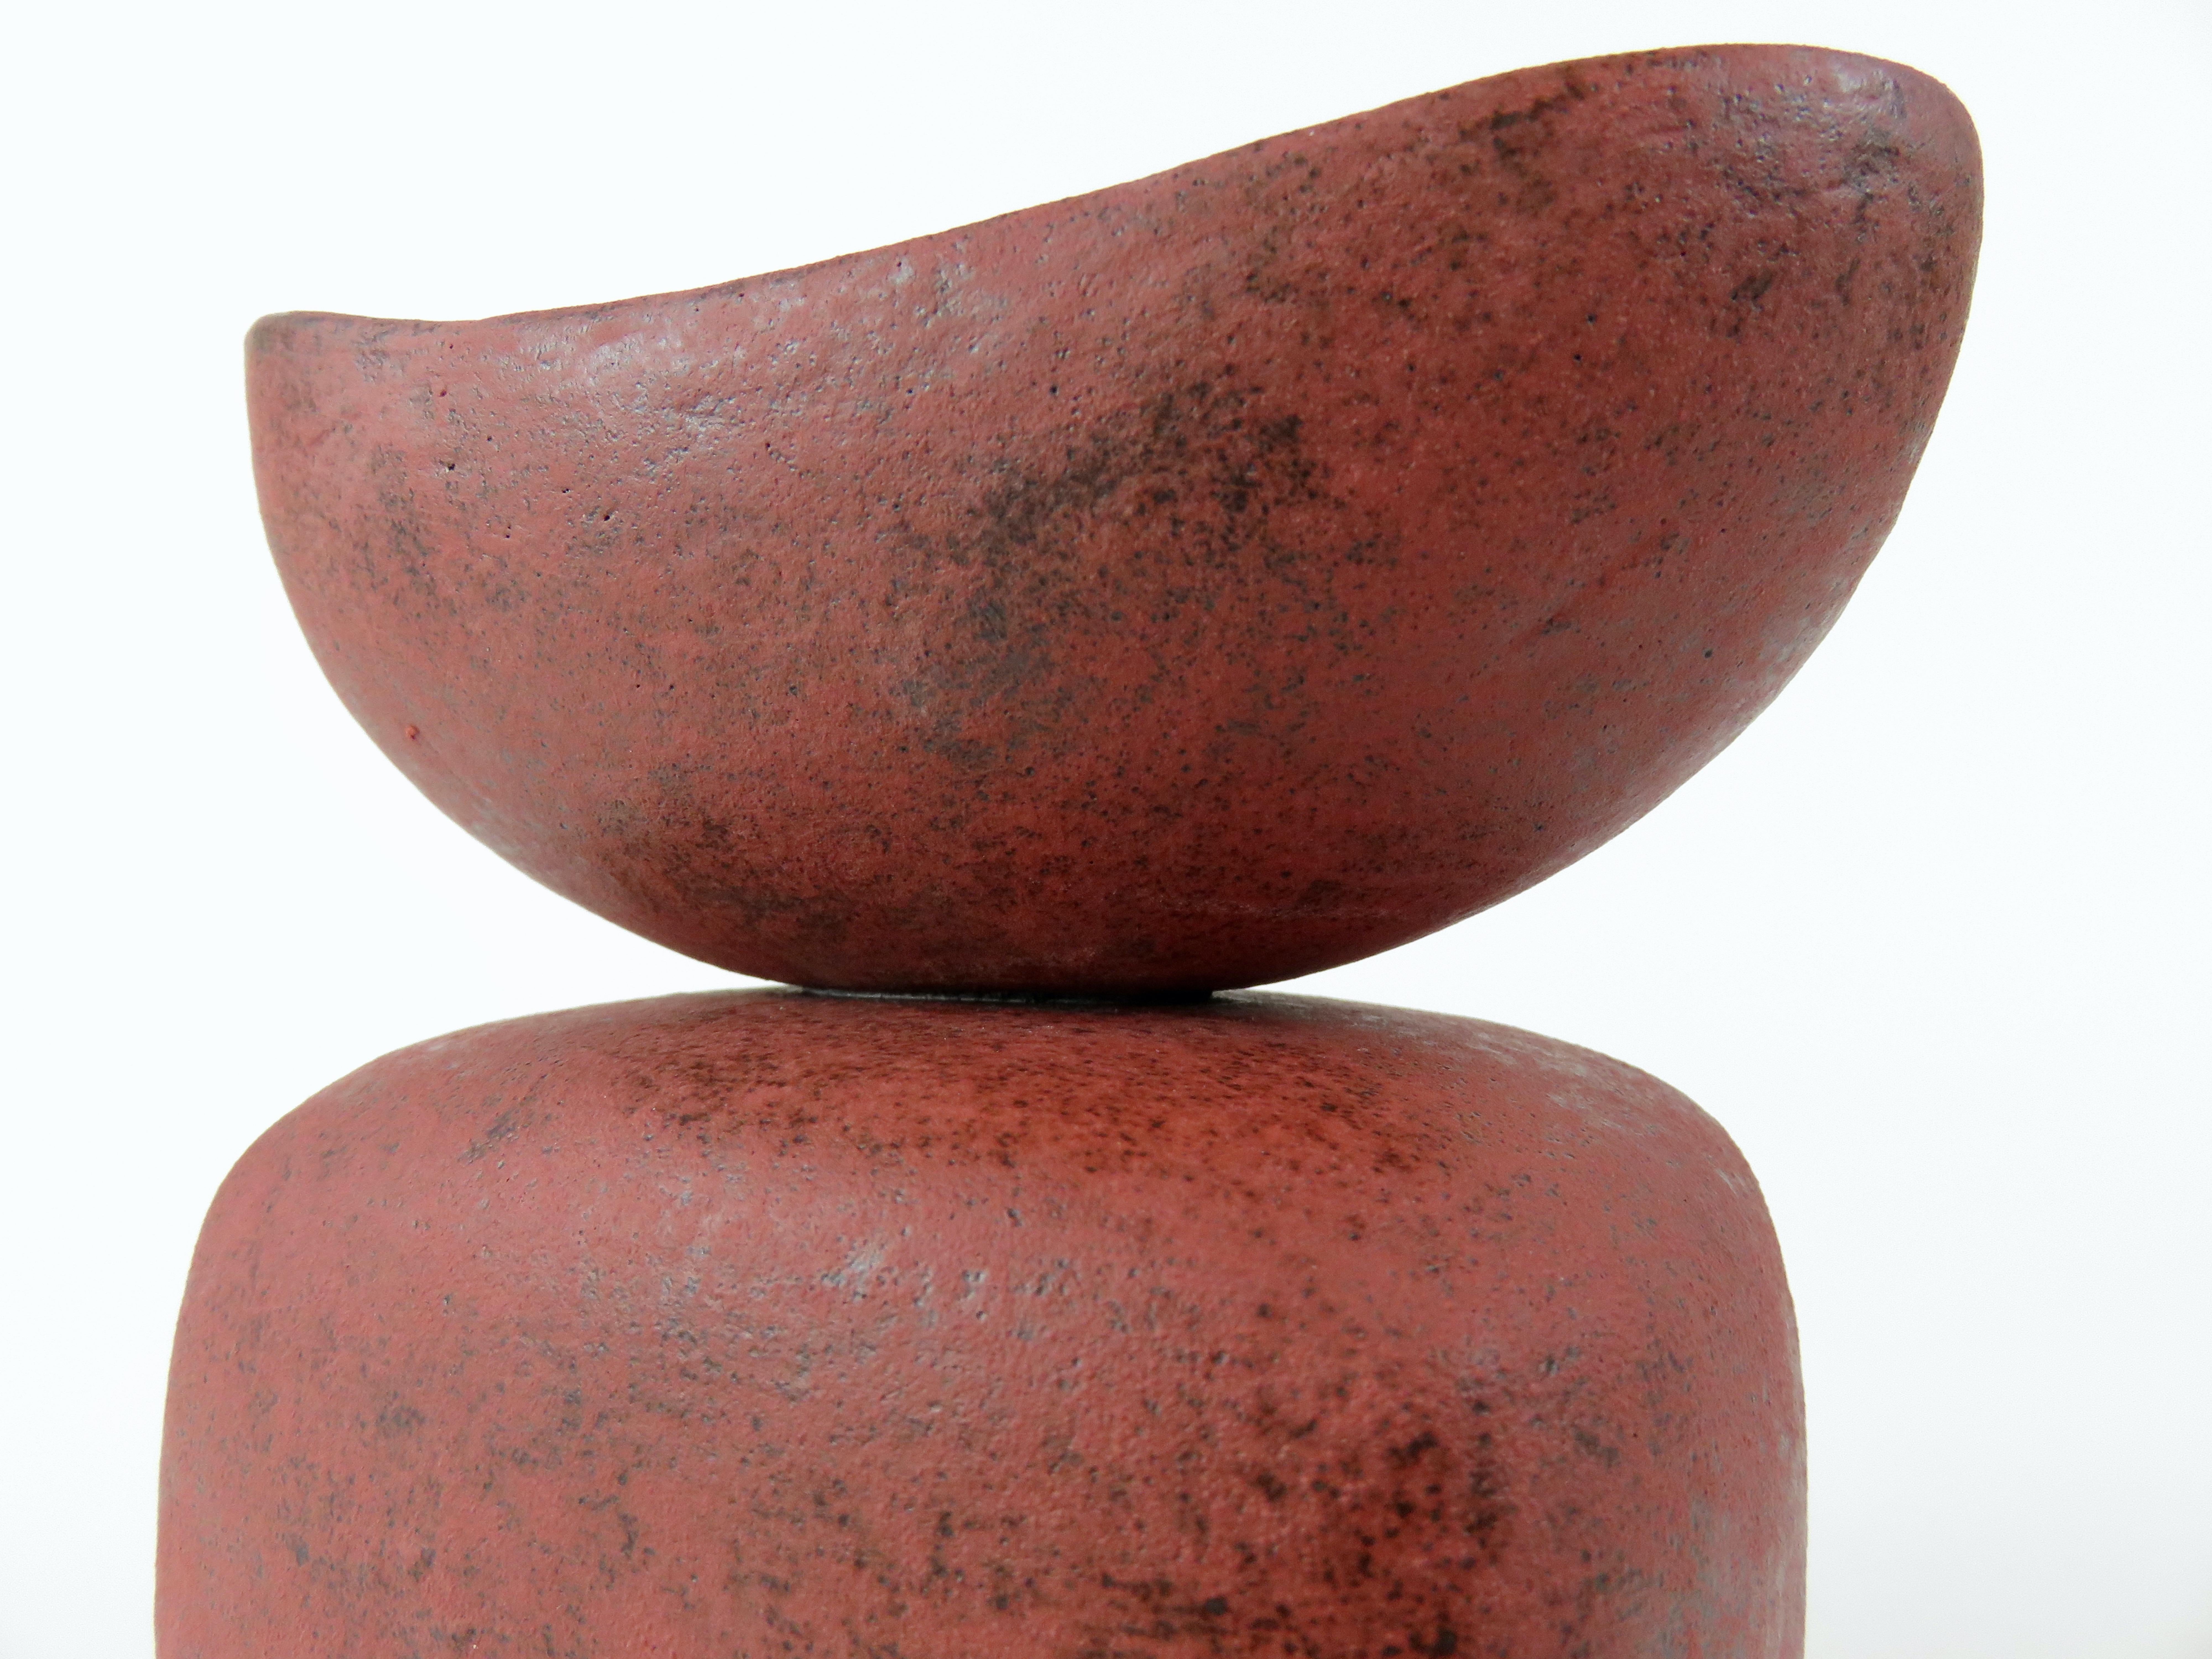 Mottled Red Ceramic Sculpture, Wide Oval Cup on Rounded Cube, Hand Built  5